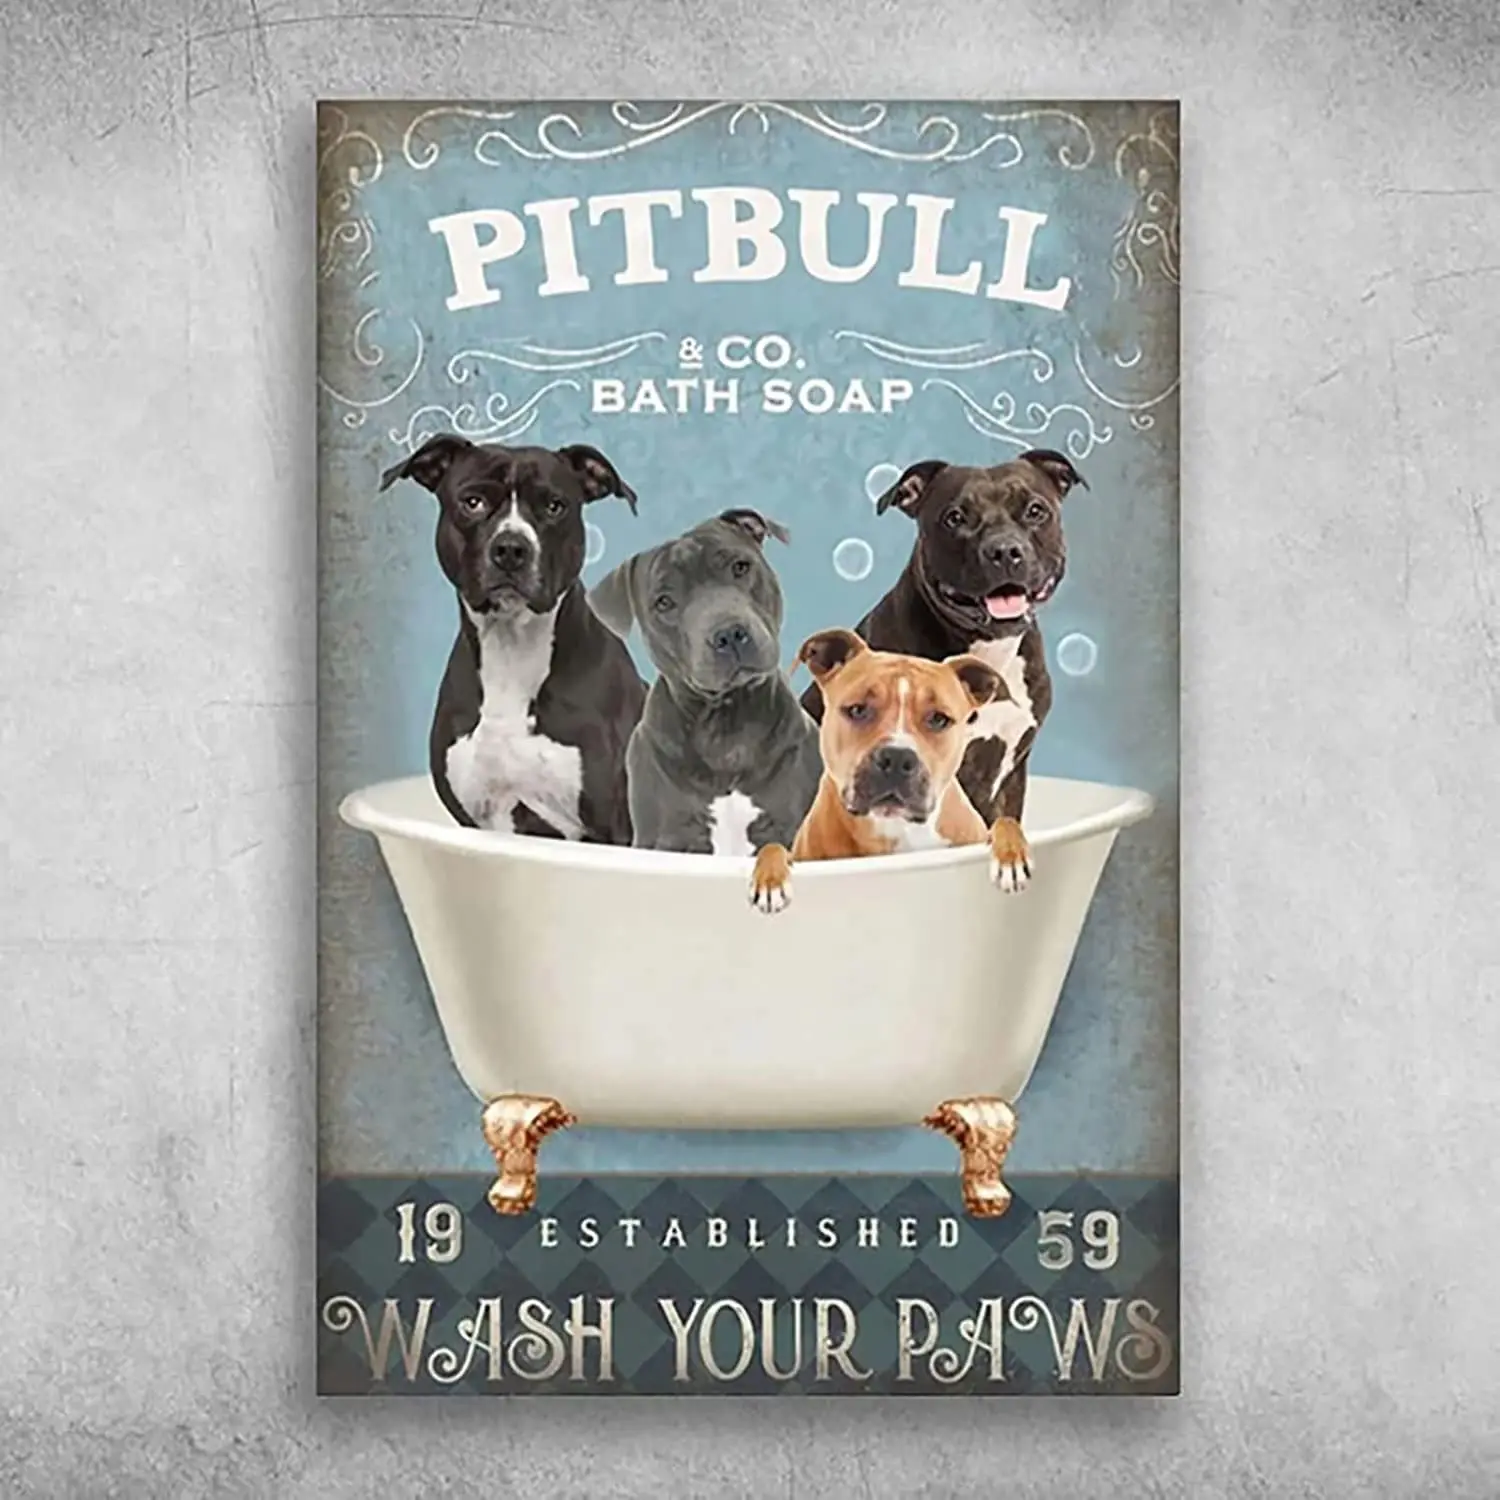 

Pitbull Dog Metal Tin Sign Bath Soap Wash Your Paws Funny Print Poster Cafe Kitchen Home Art Wall Decor Plaque Gift tin sign